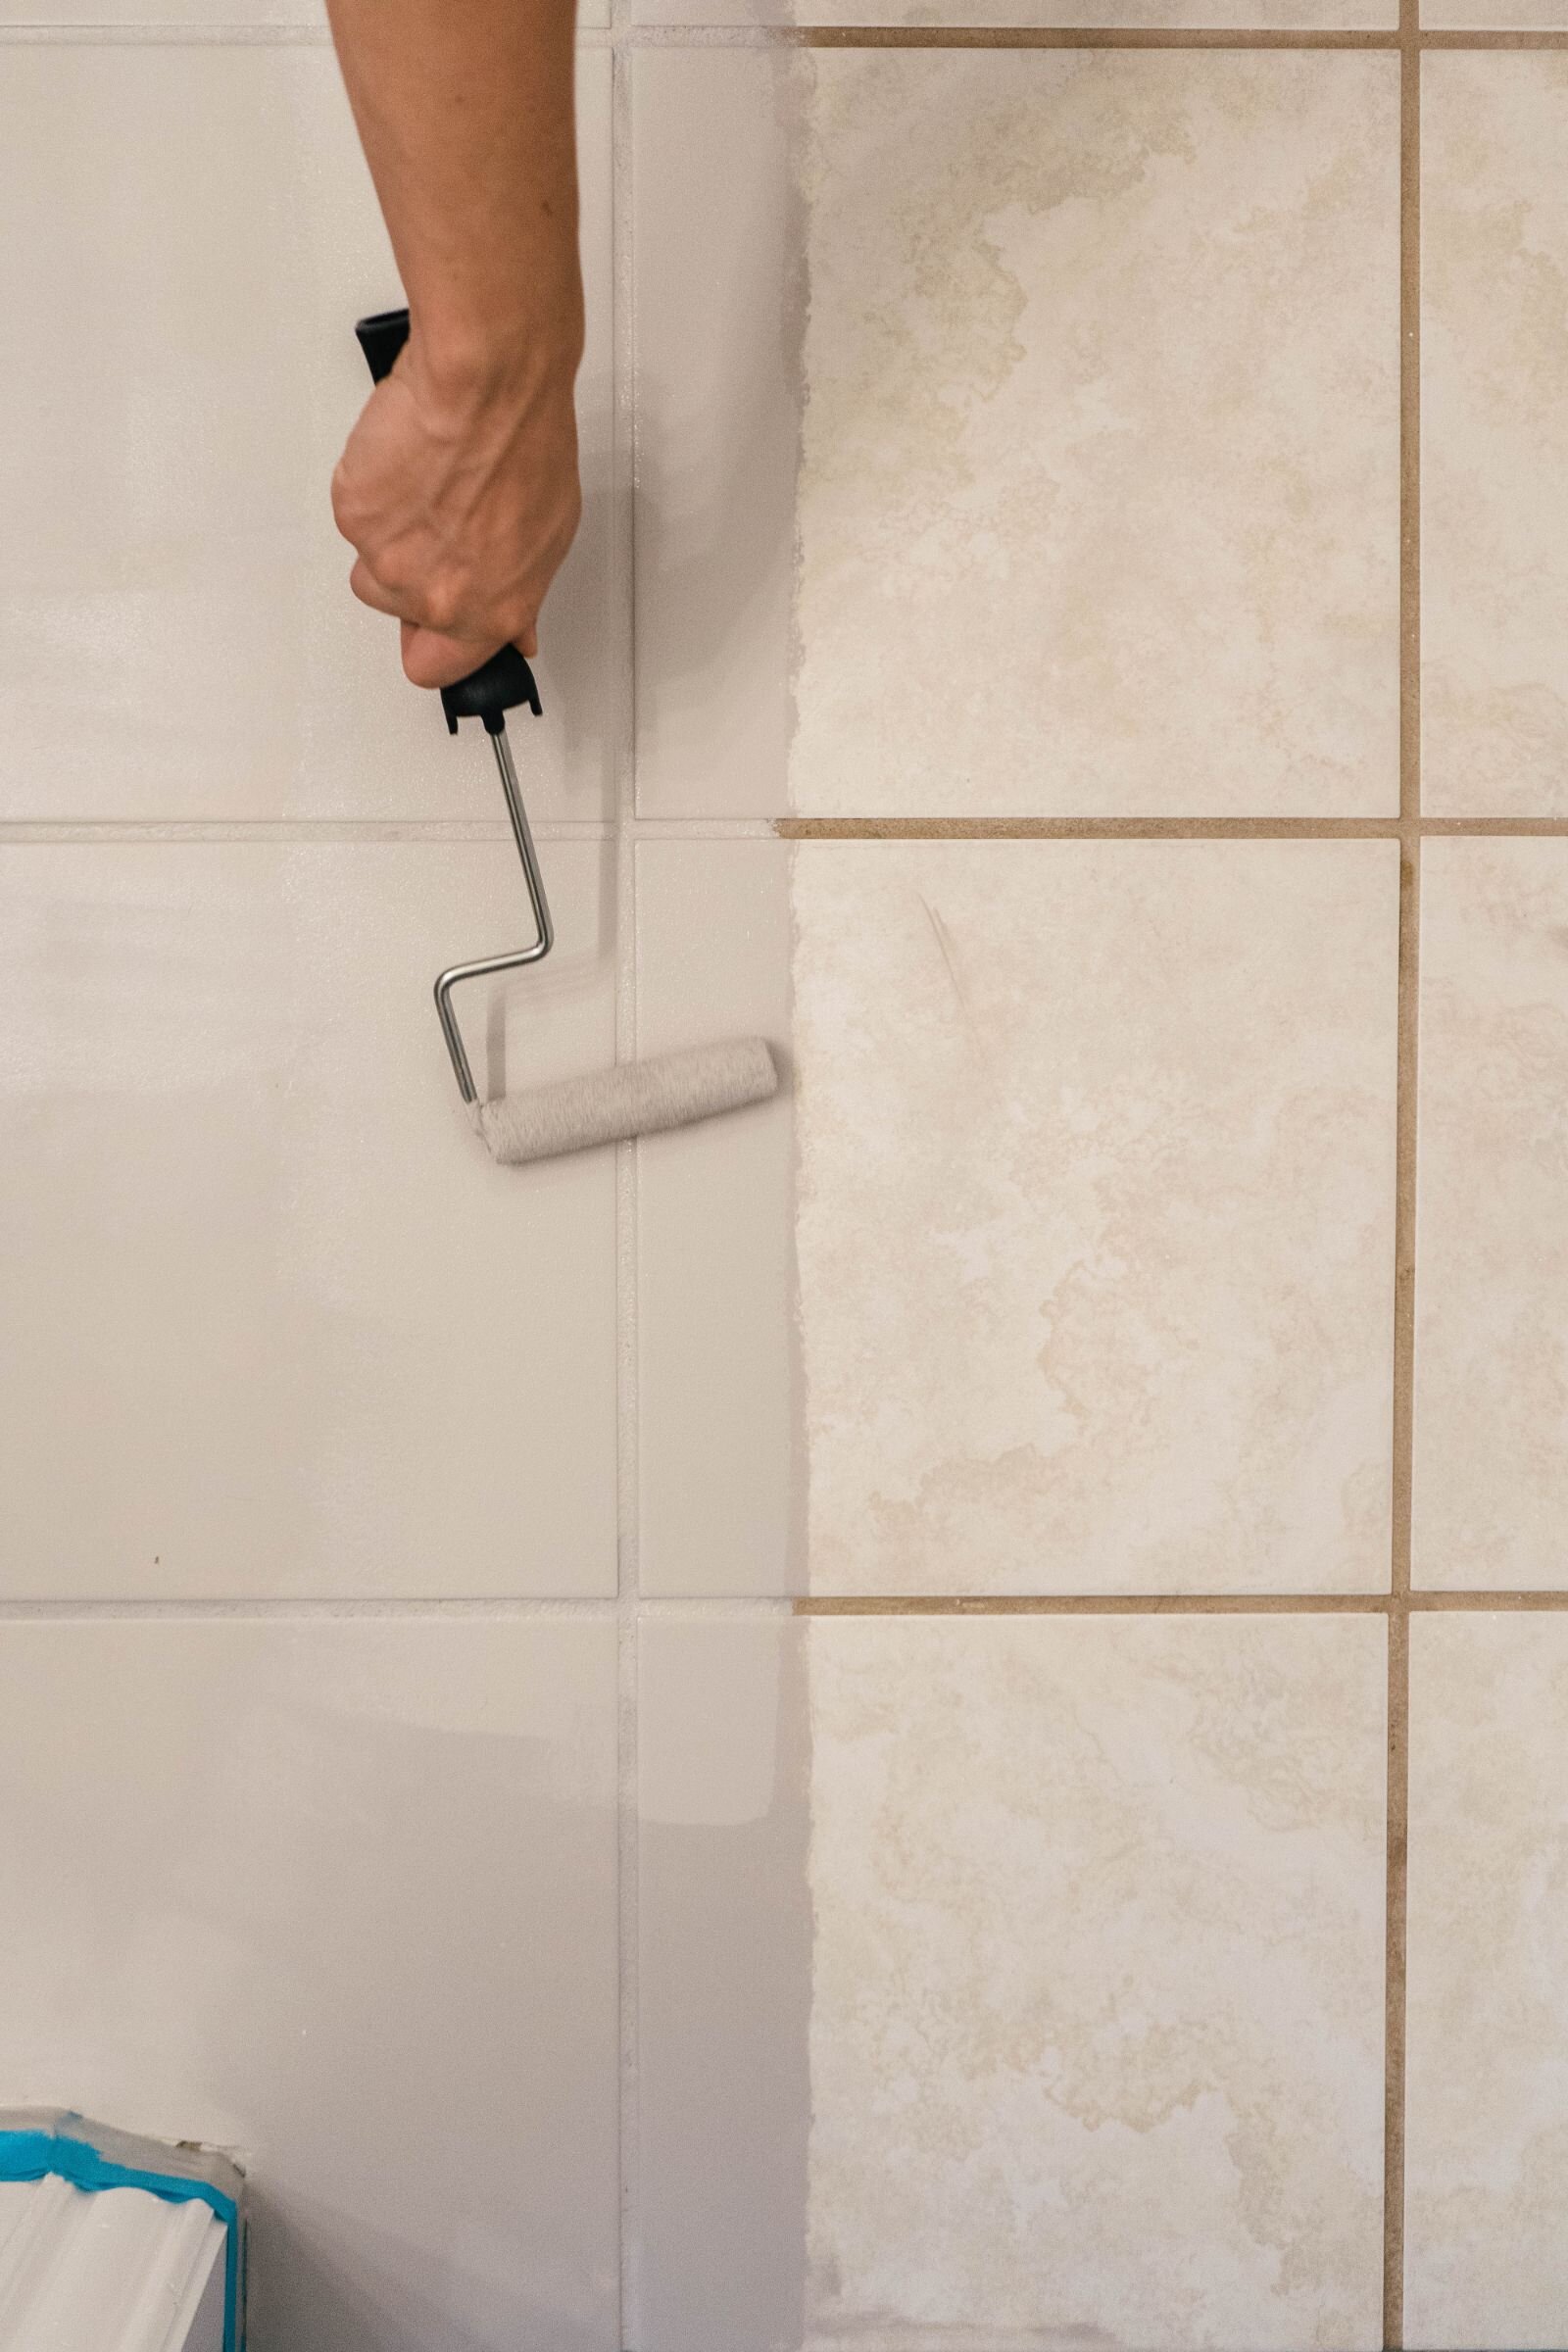 Diy How To Paint Ceramic Floor Tile, Can You Change The Color Of Ceramic Tile